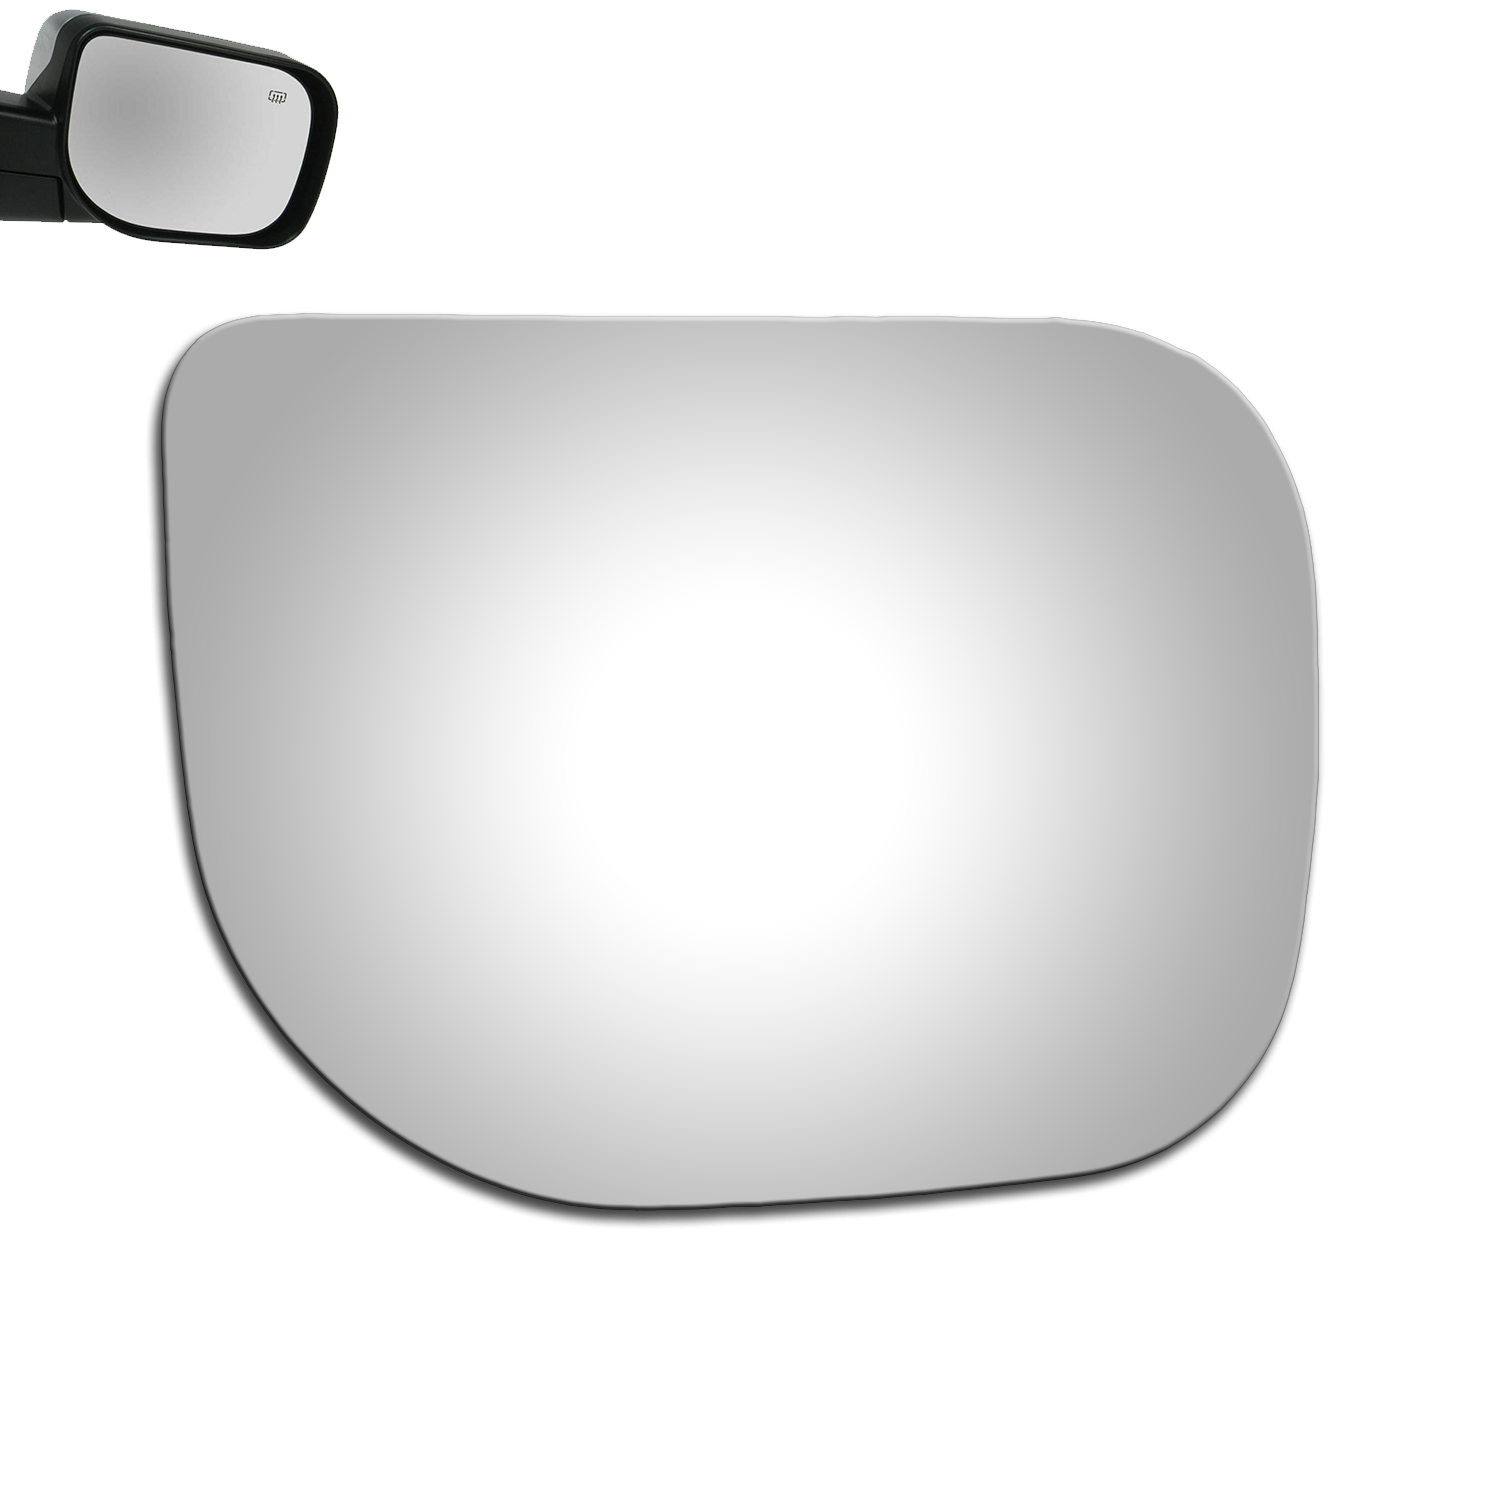 WLLW Replacement Mirror Glass for Nissan 2005-2009 Armada/2004 Pathfinder Armada/2004-2008 Titan, Driver Left Side LH/Passenger Right Side RH/The Both Sides Flat Convex M-0088